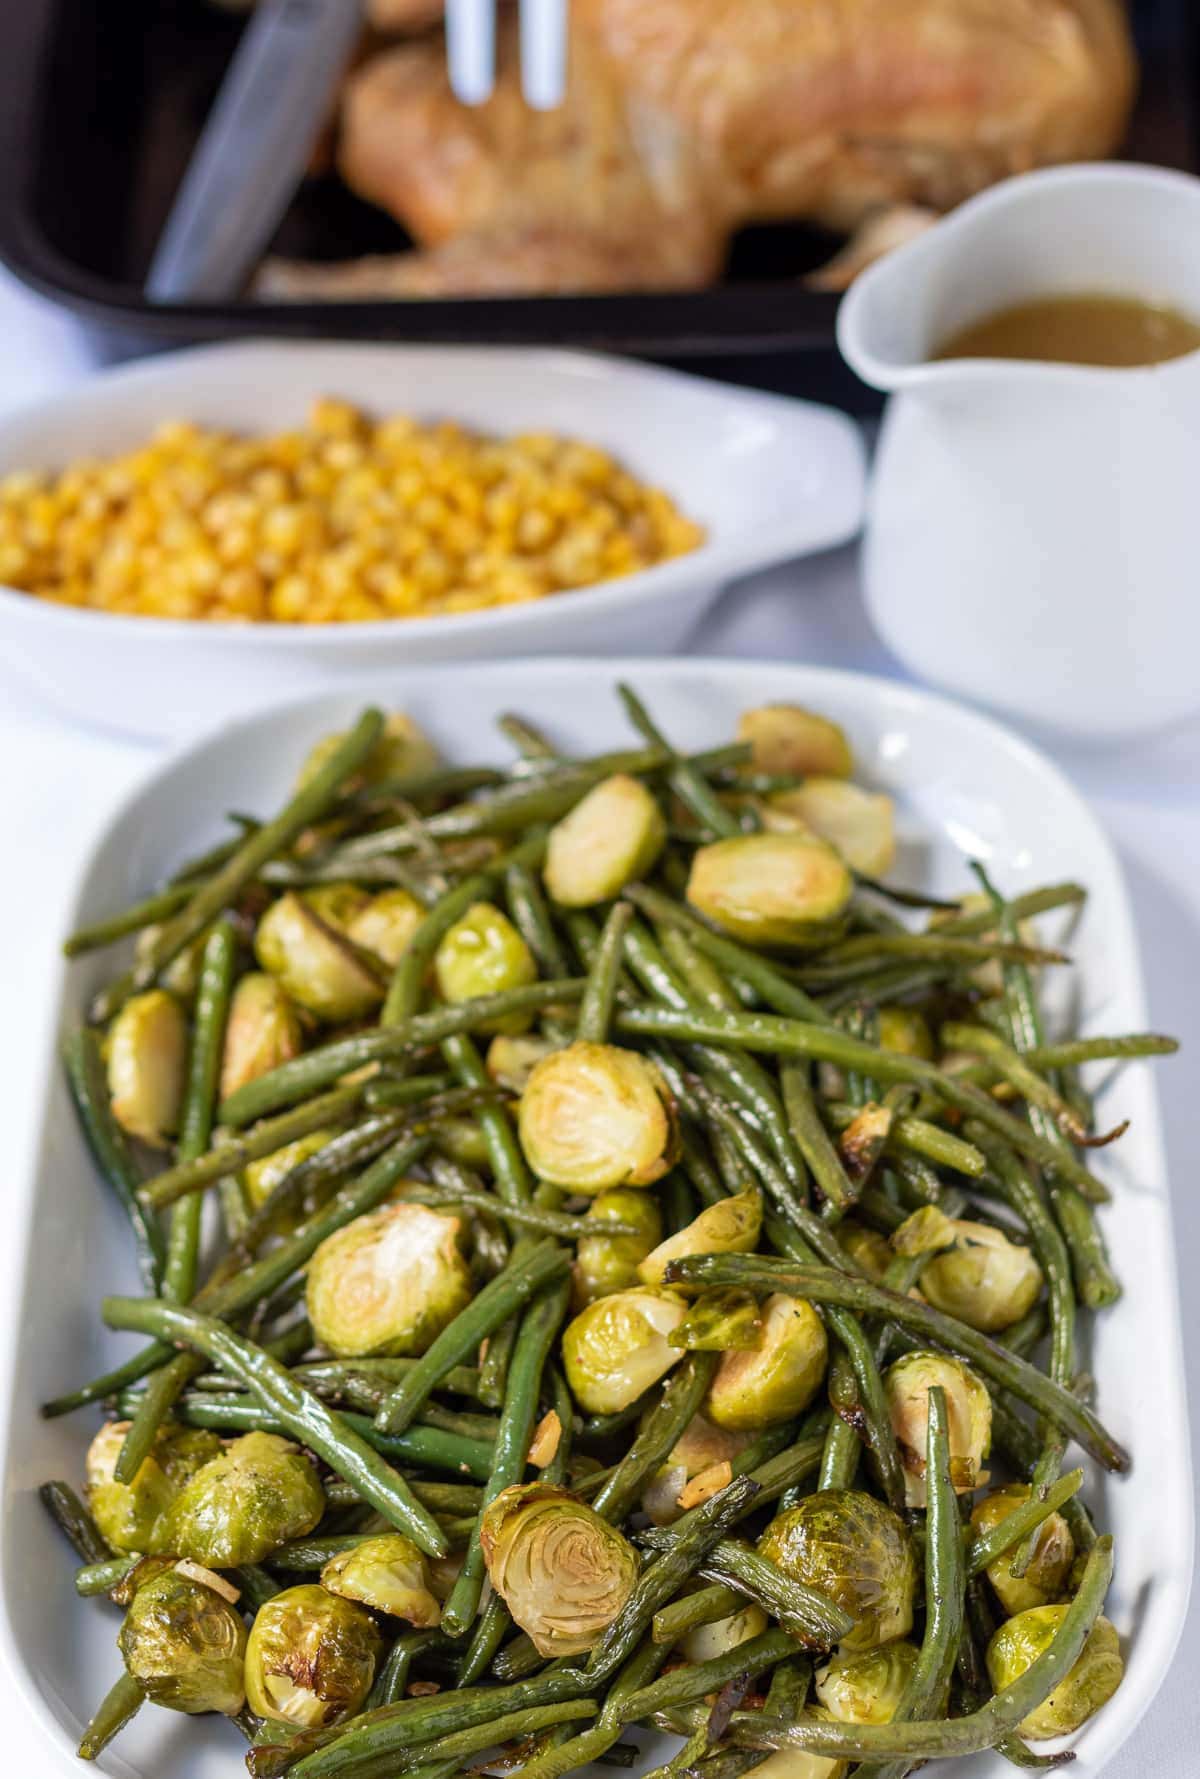 Roasted brussels sprouts and green beans served on a large platter dish with a dish of sweetcorn, jug of gravy and roast chicken in the background.